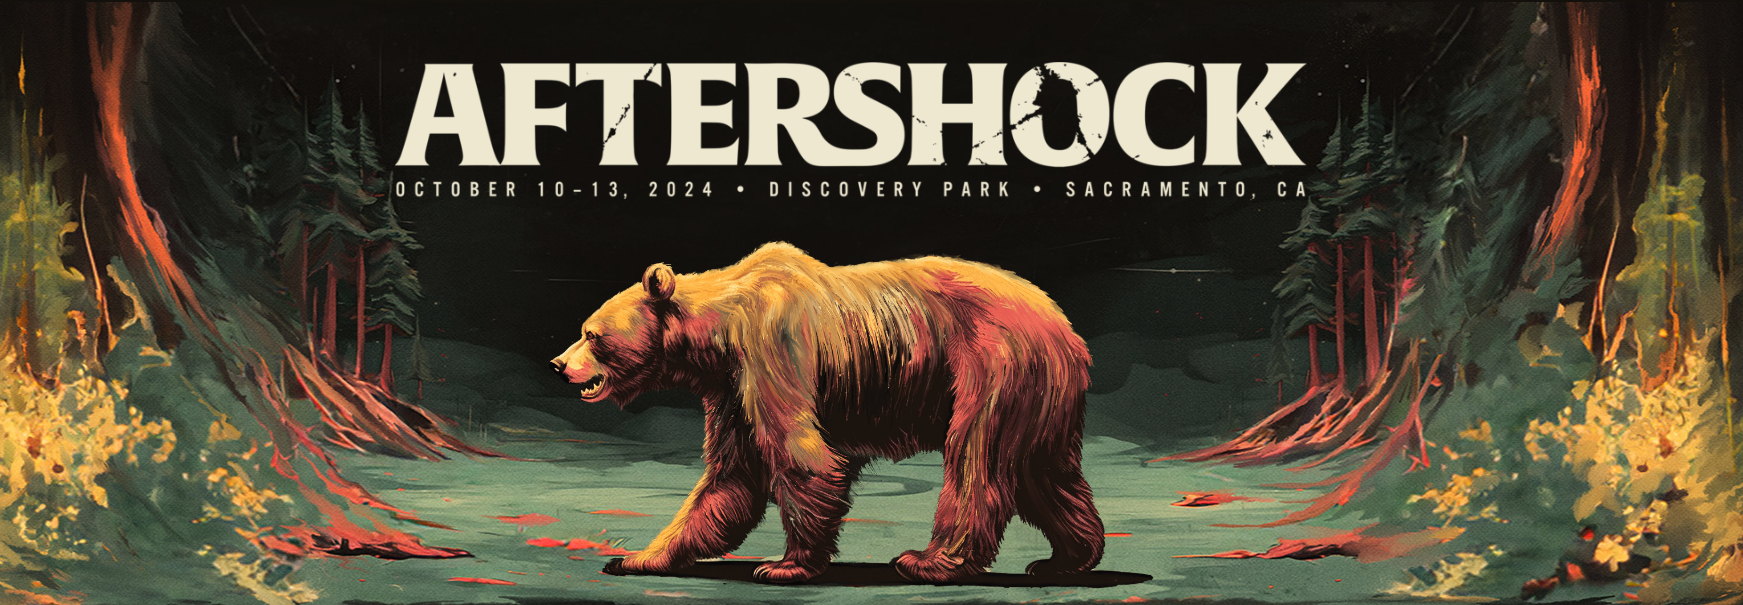 Aftershock Festival 2024 A Thunderous Spectacle of Music and Mayhem